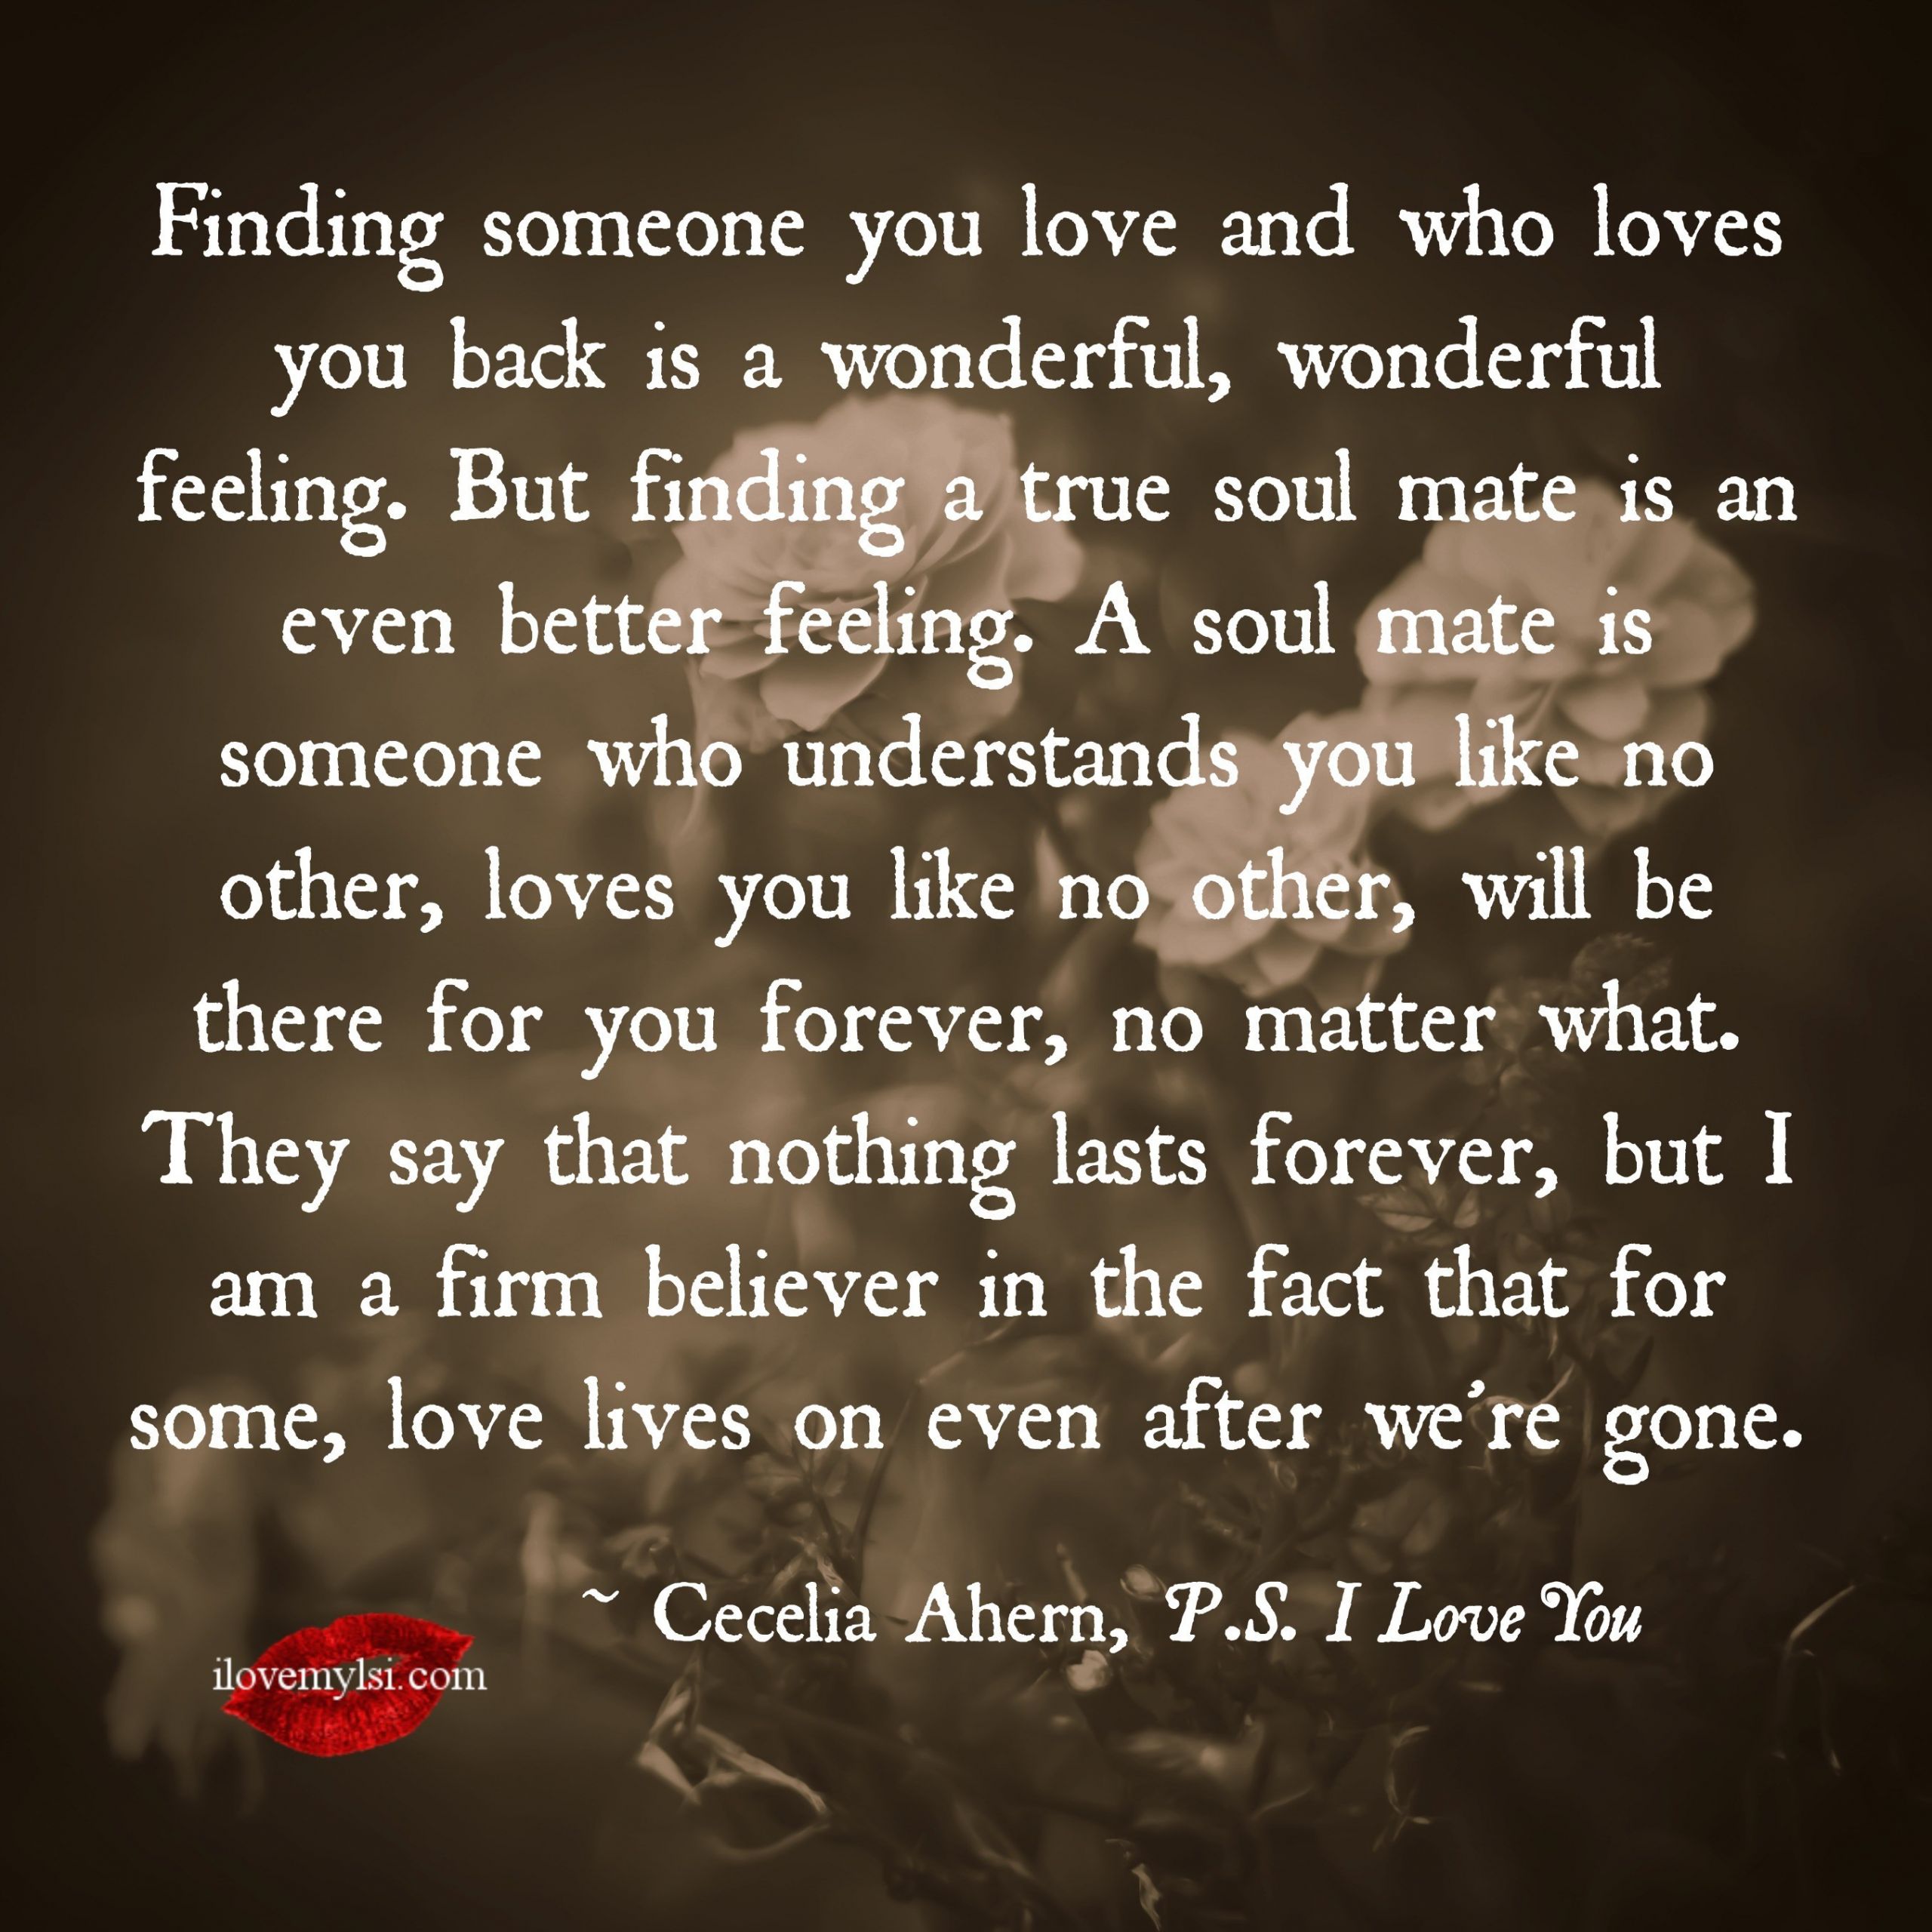 The Most Romantic Quotes
 The 25 Most Romantic Love Quotes You Will Ever Read